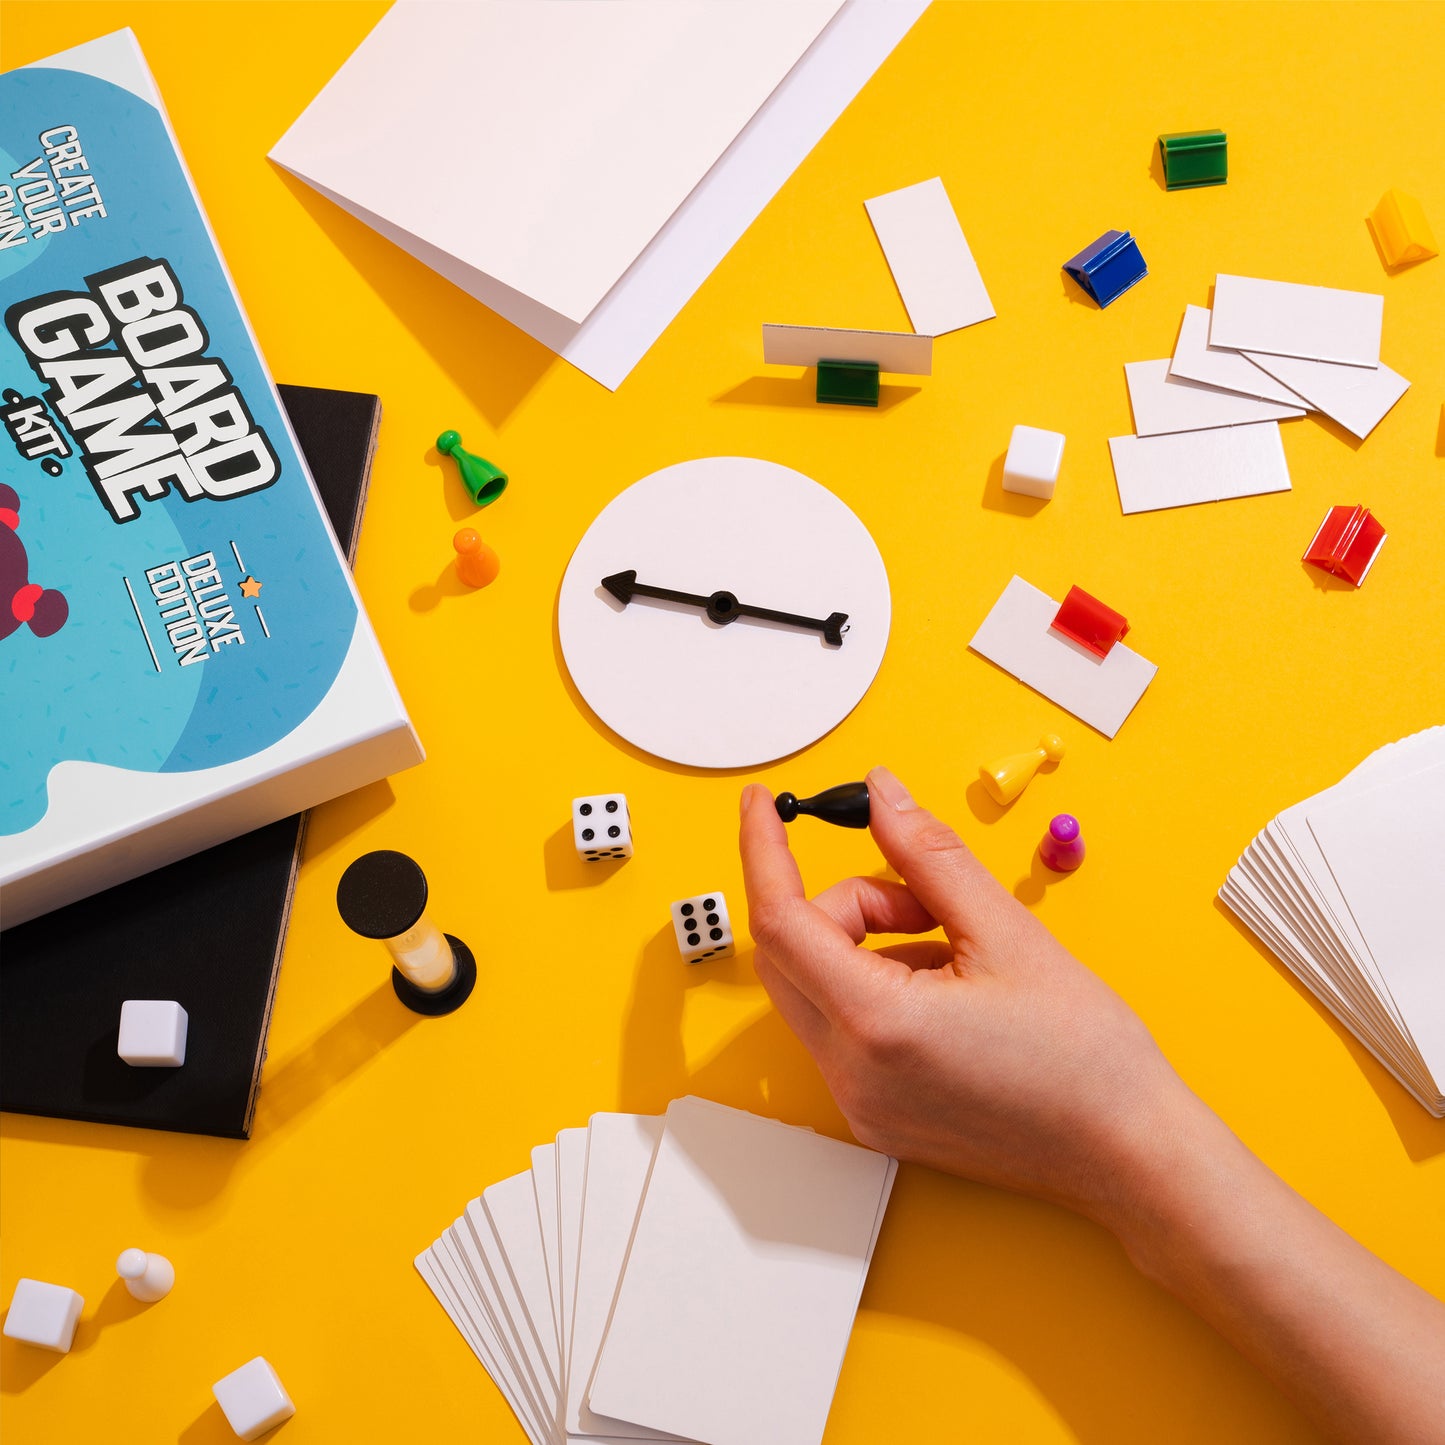 Create Your Own Board Game Set - Deluxe Edition